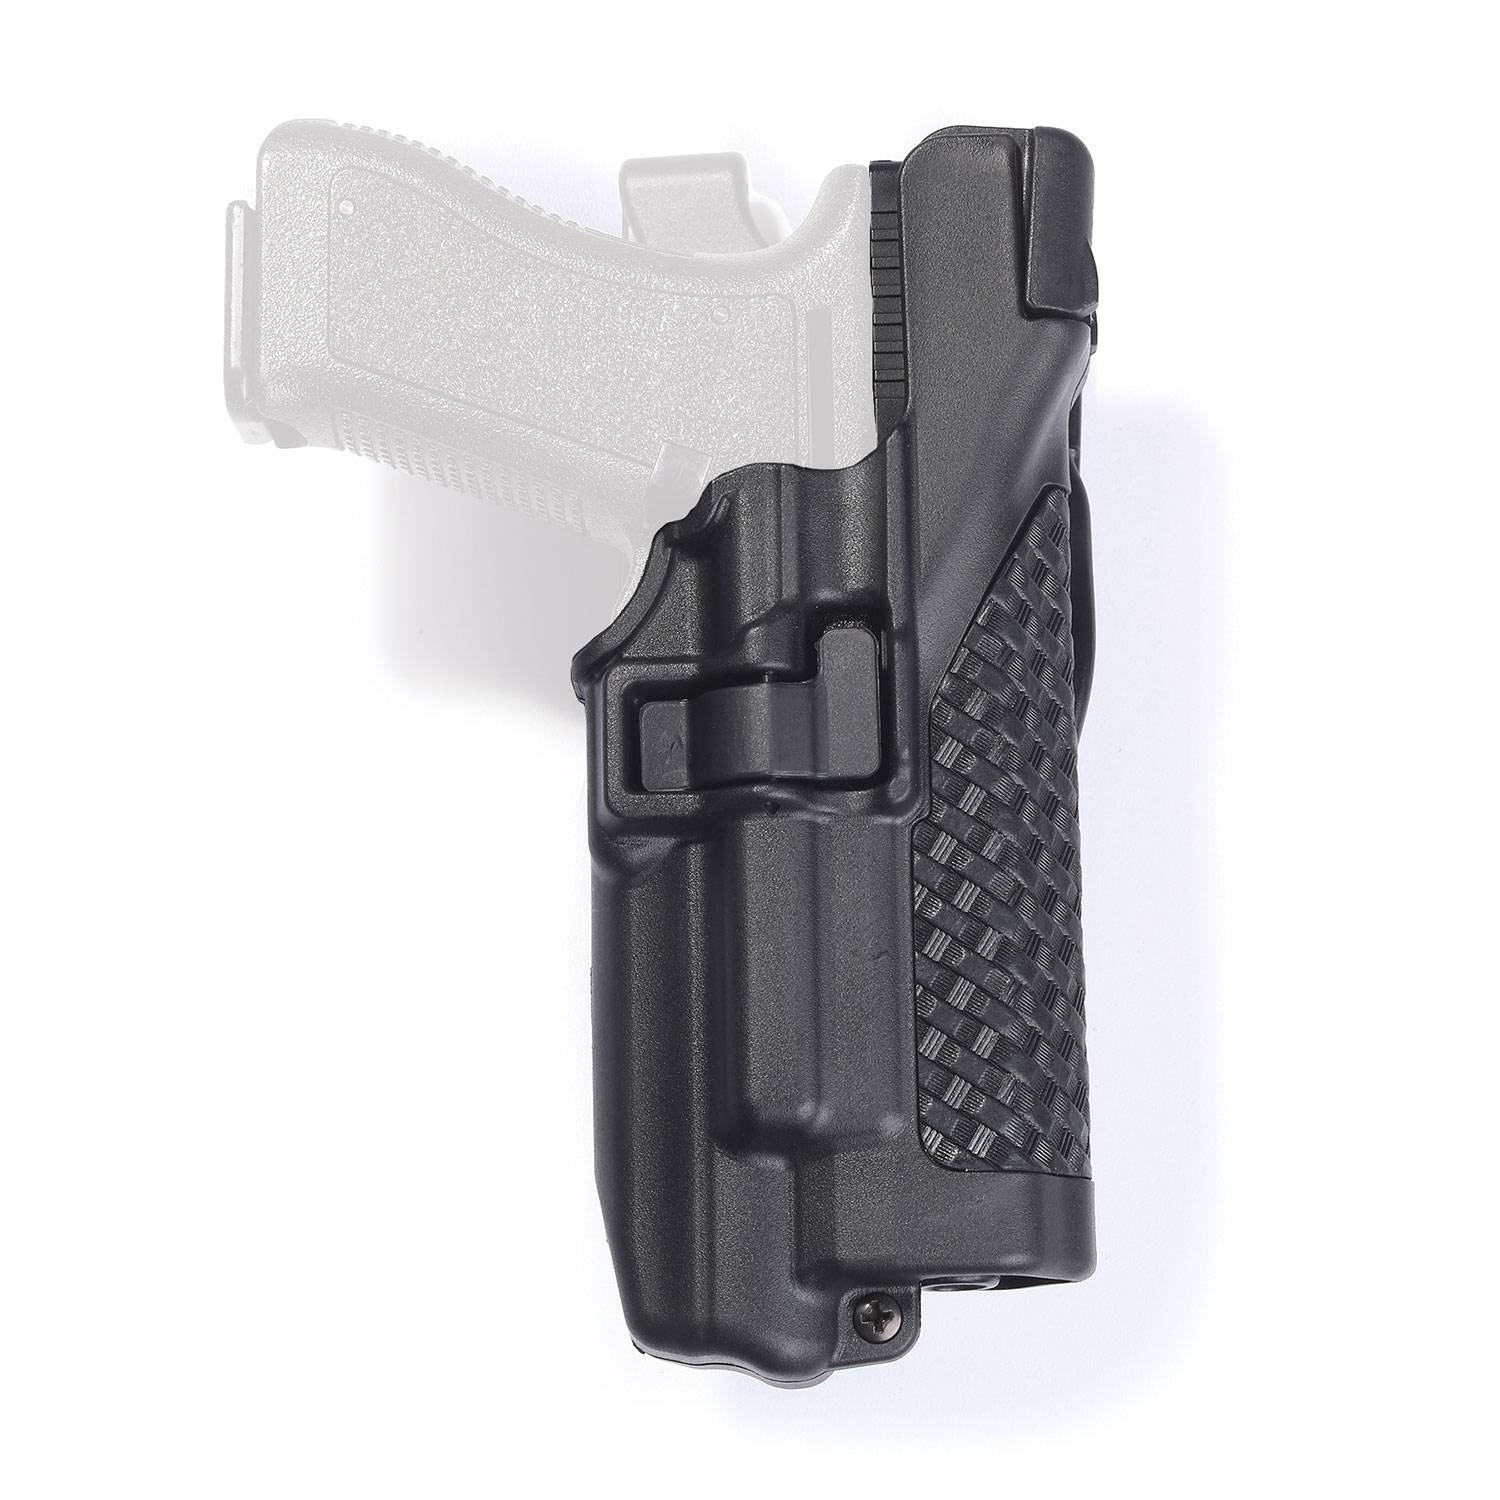 Details about   Serpa Light Bearing Level 3 Duty Mounted Belt Holster for GLOCK17 19 22 23 31 32 